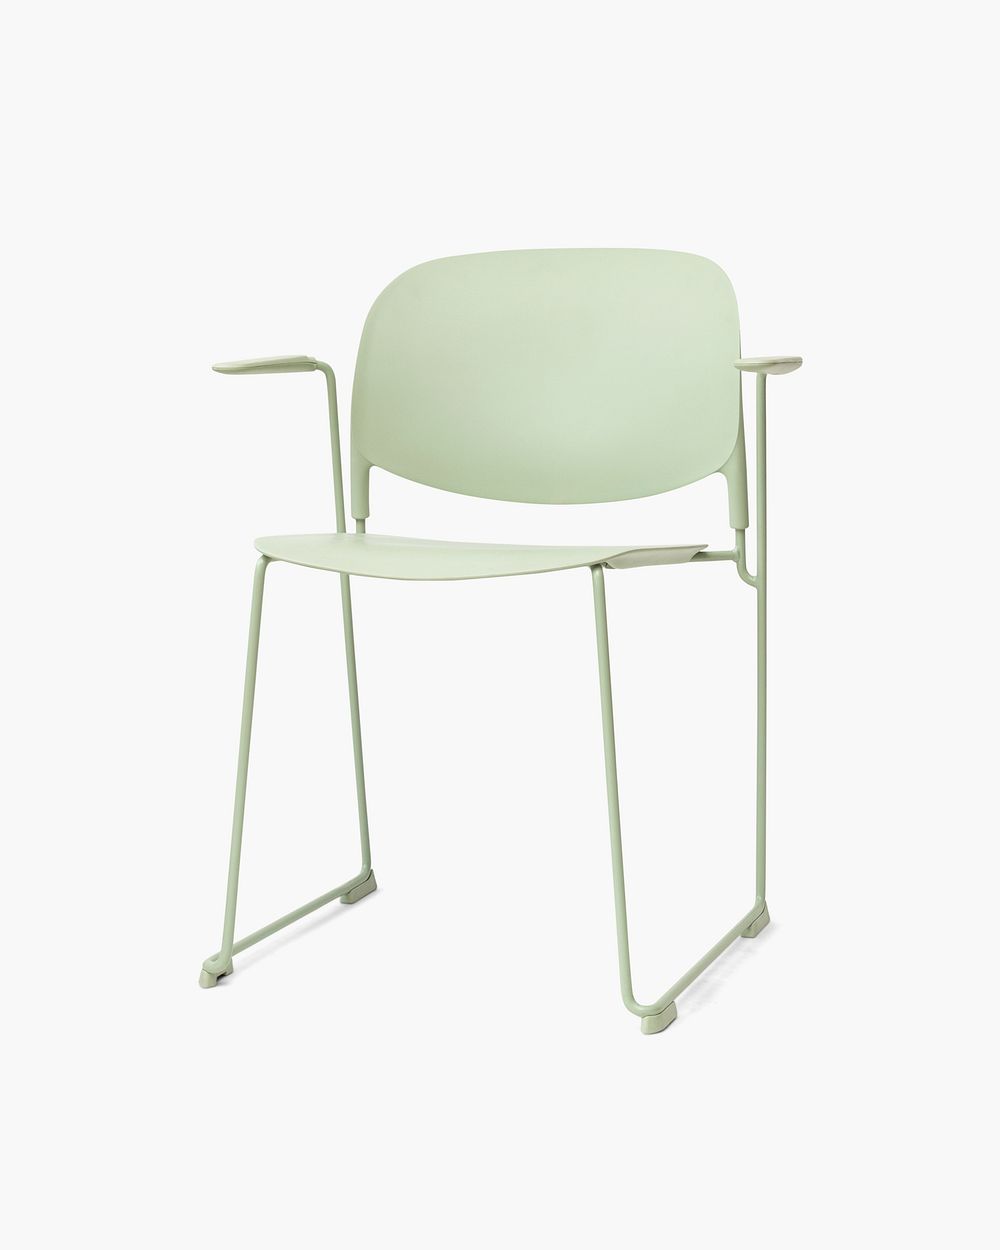 Mint green chair for kids room